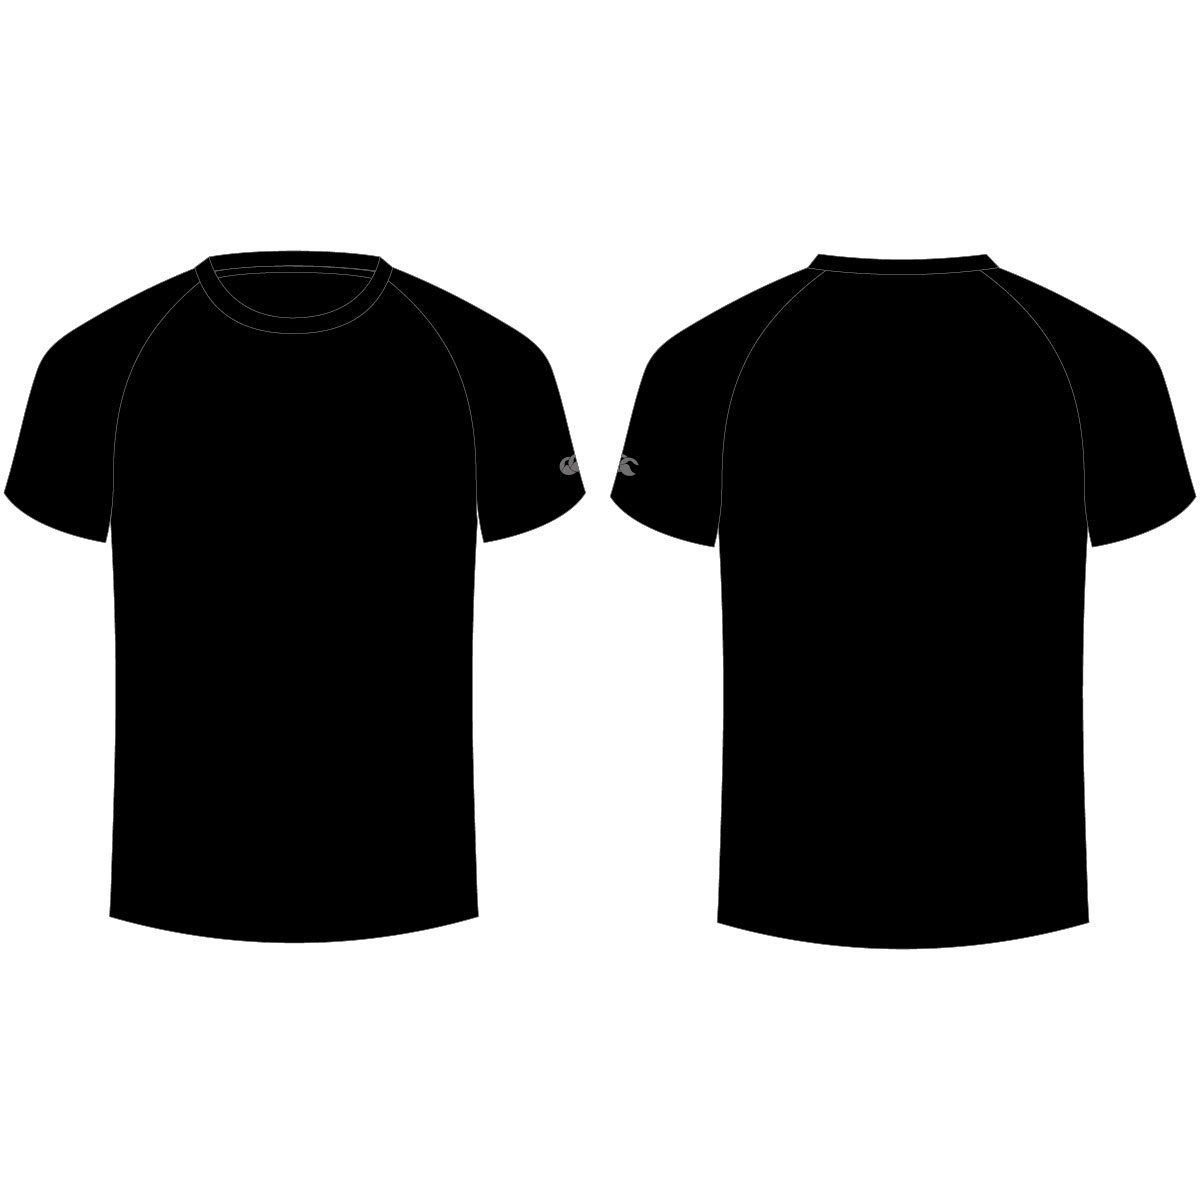 Trends For > Blank T Shirt Design Png